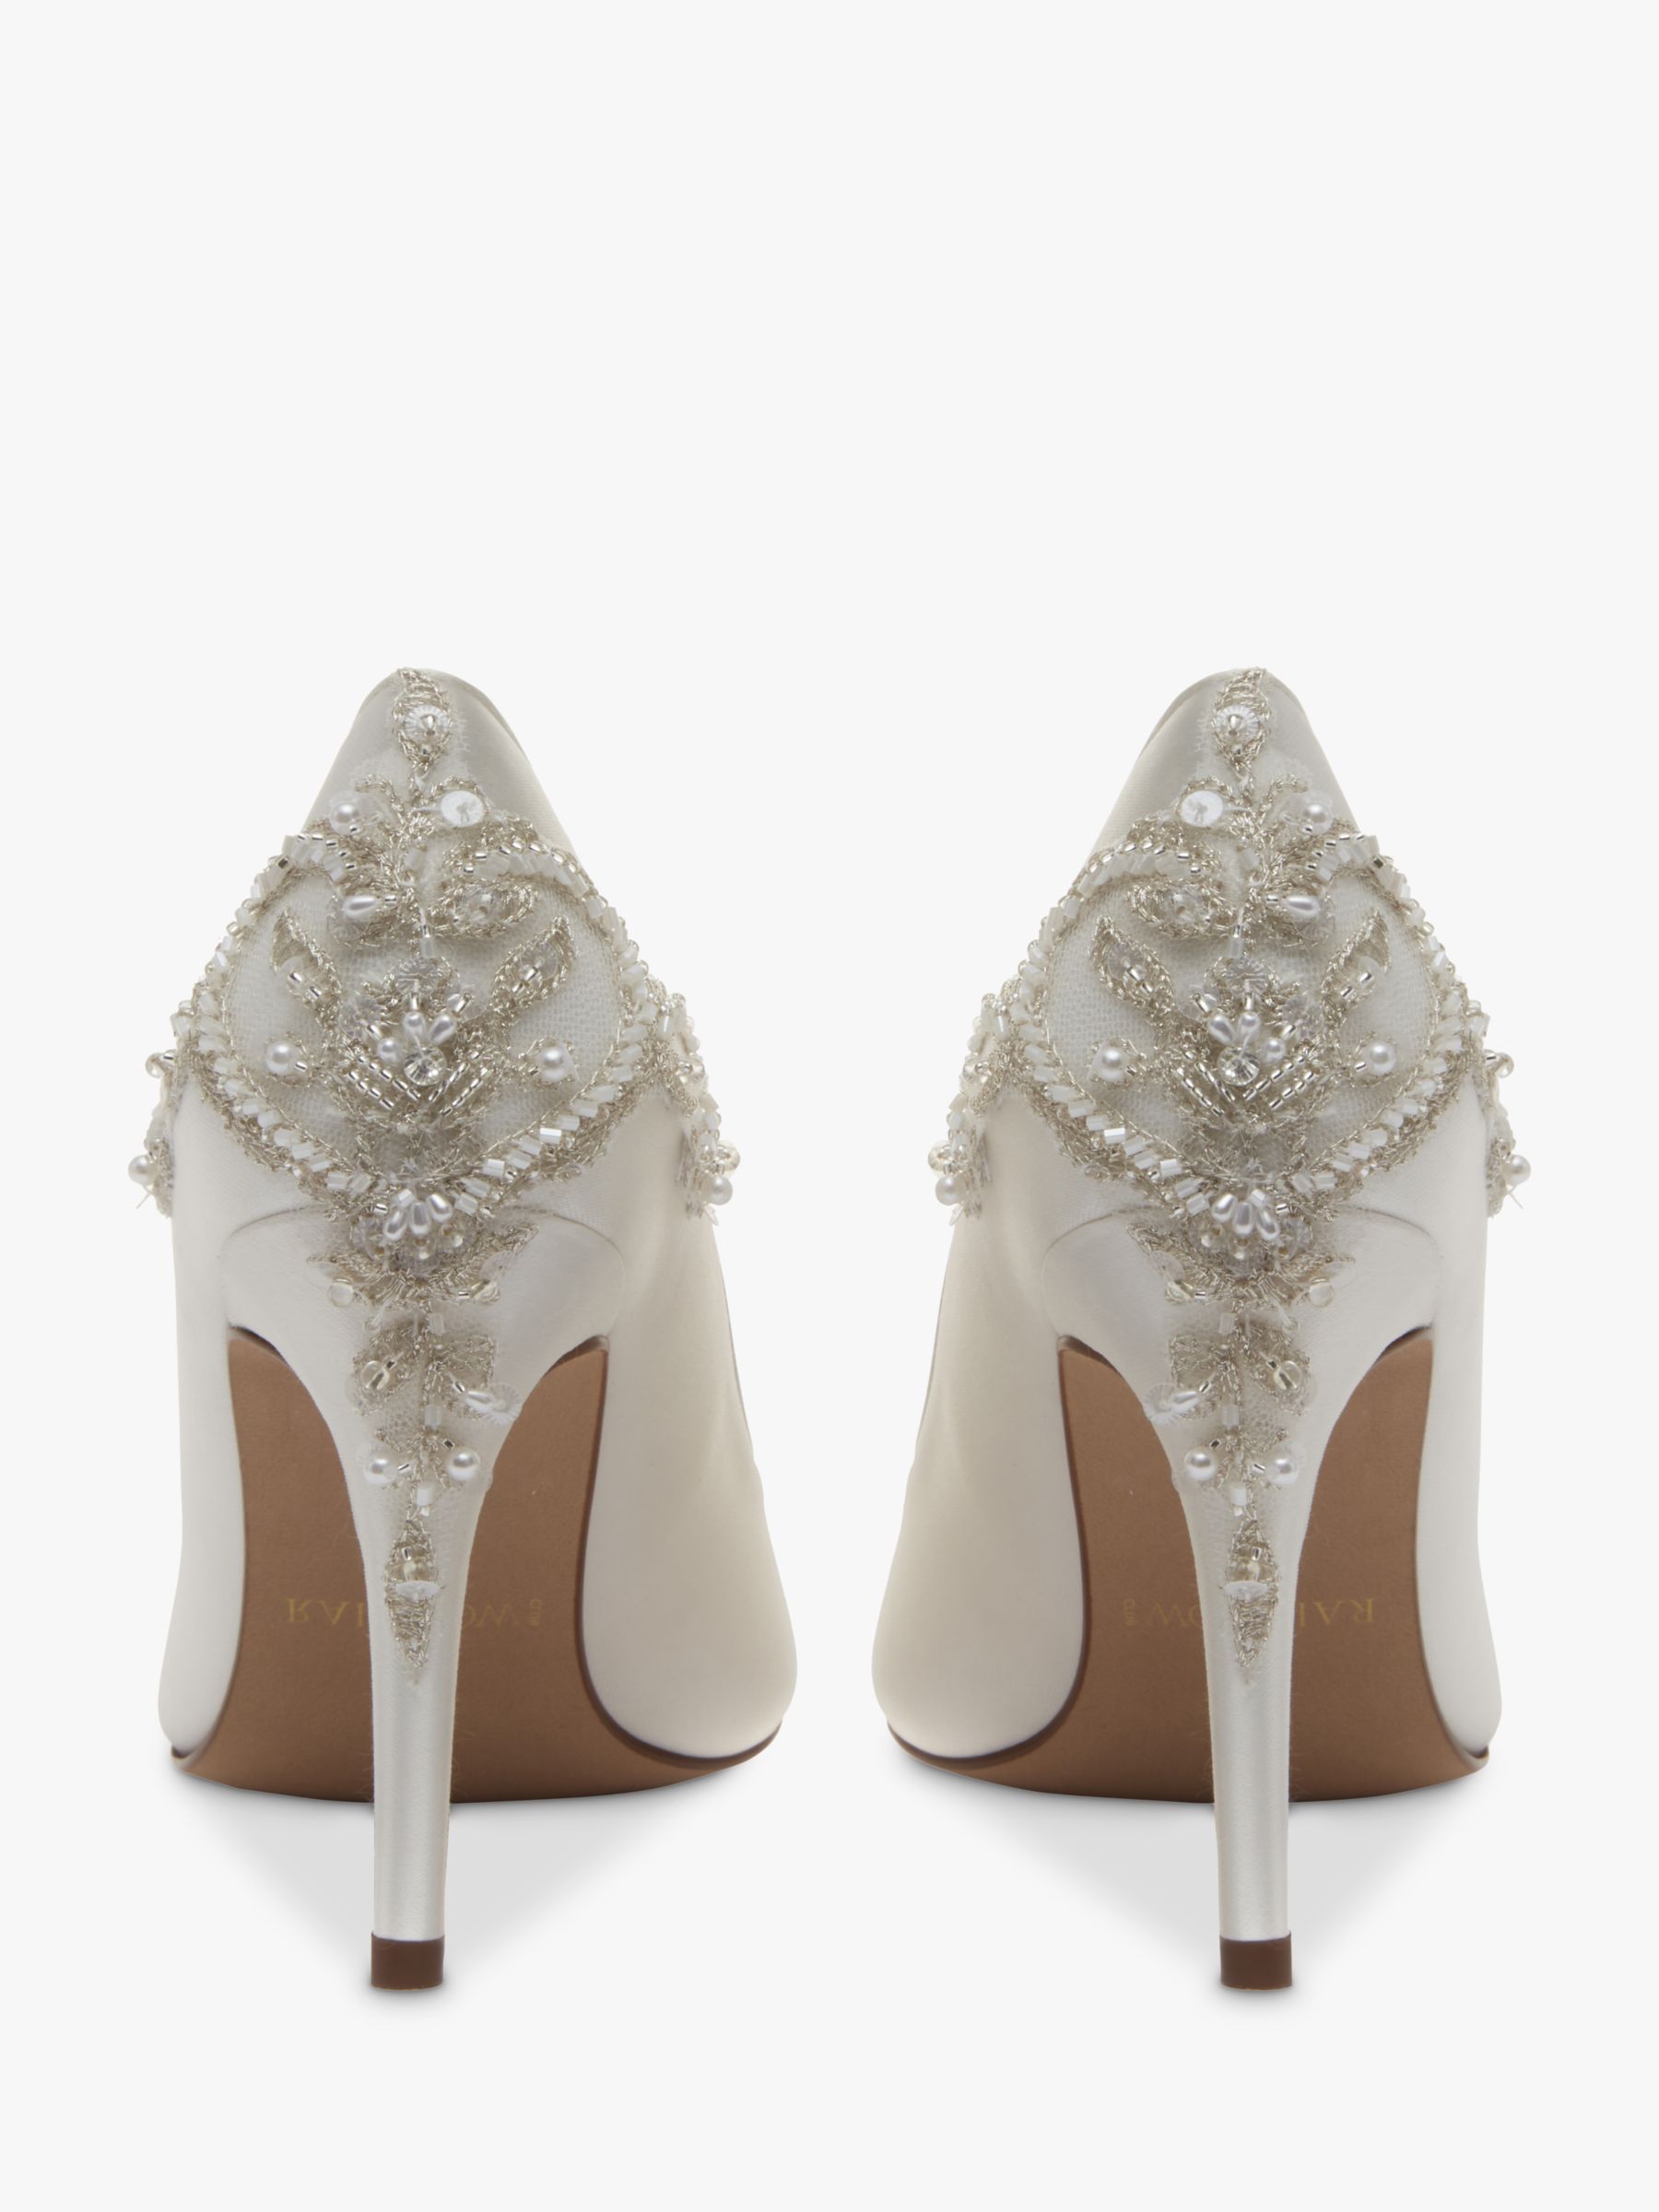 Rainbow Club Willow Embellished Court Shoes, Ivory Satin, 3.5